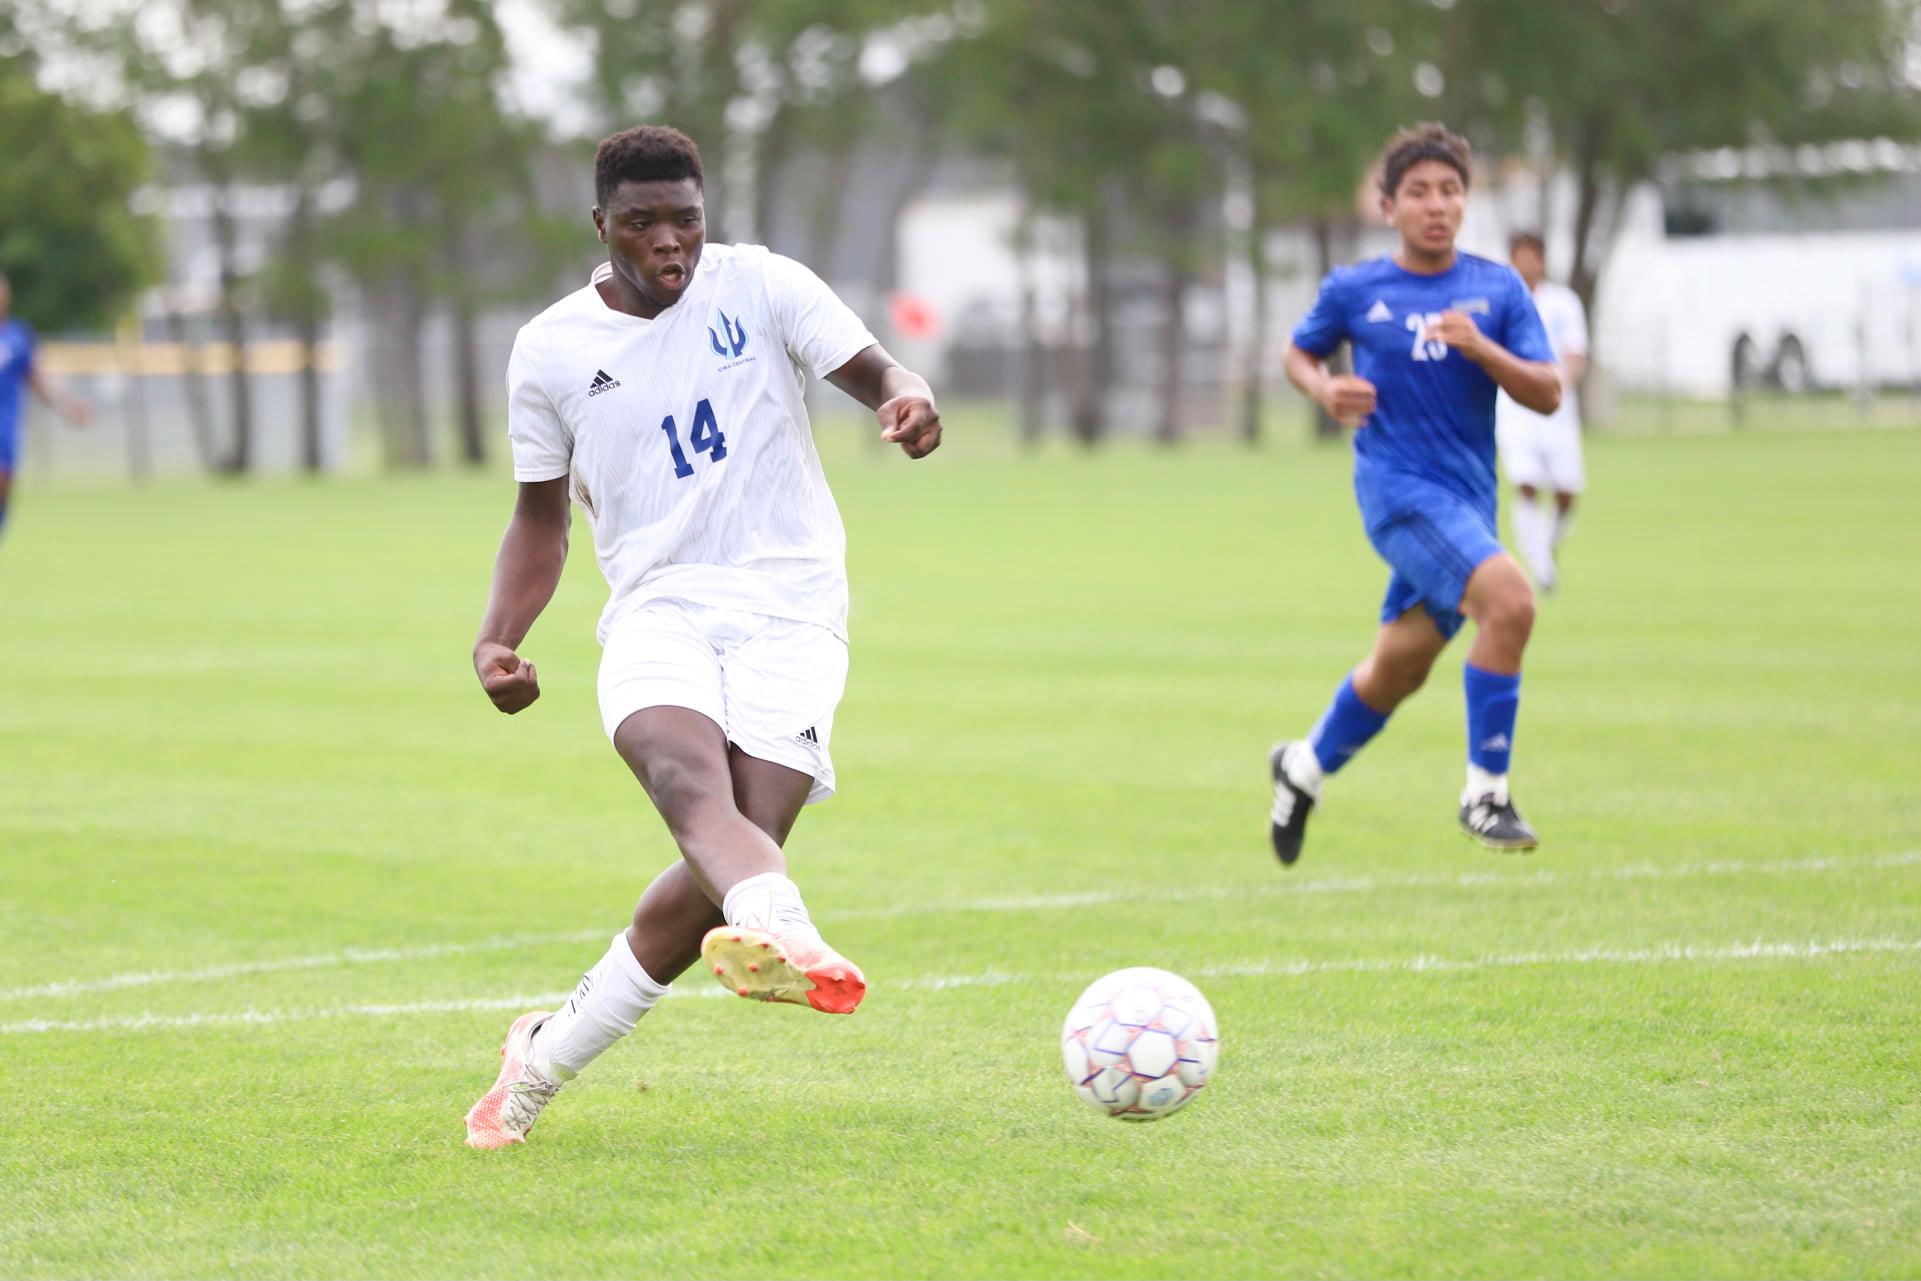 Tritons rally past Indian Hills on the pitch